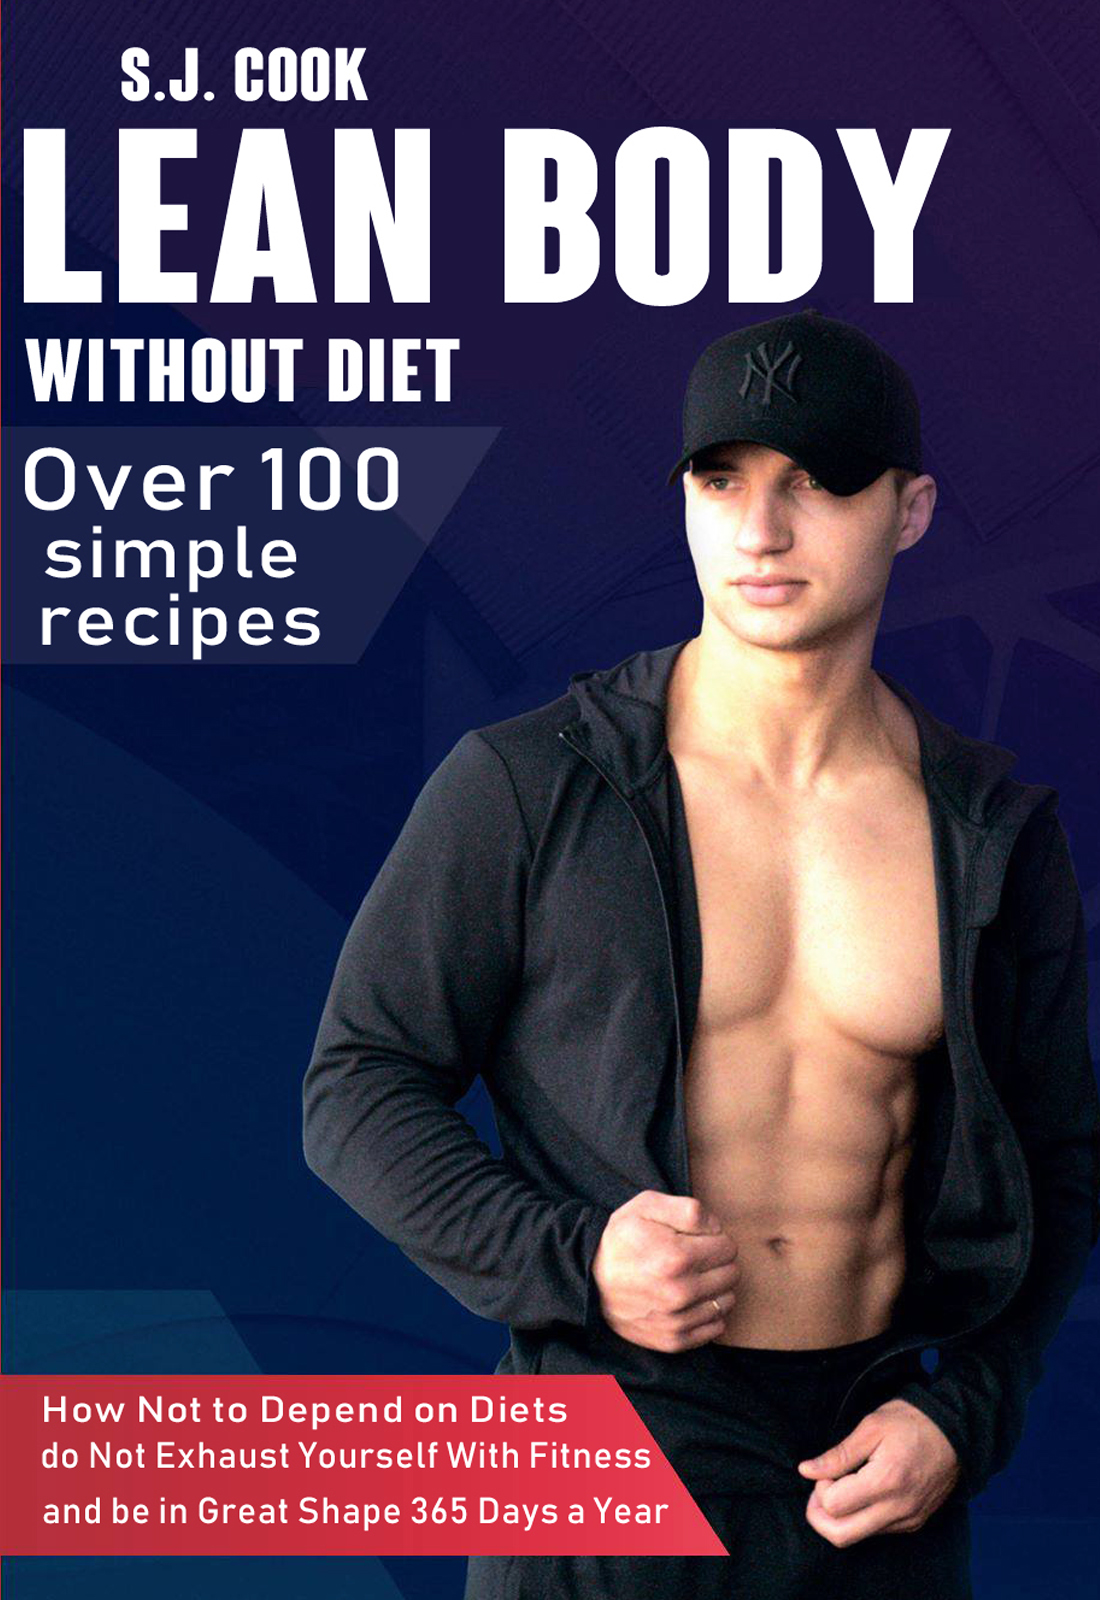 FREE: LEAN BODY WITHOUT DIET by S.J. Cook